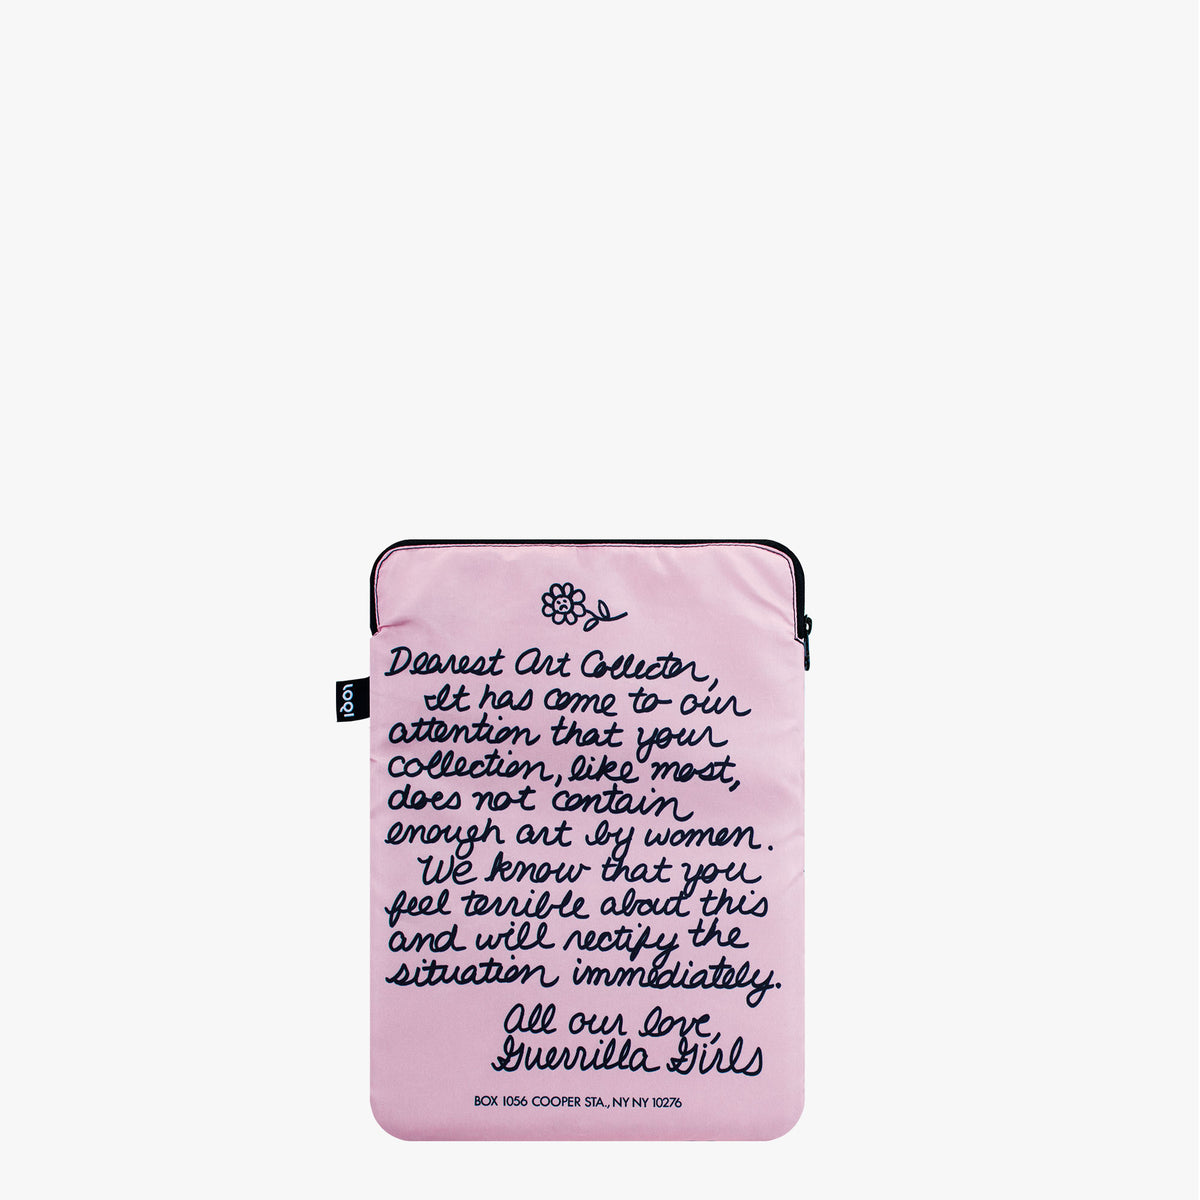 Dearest Art Collector Recycled Laptop Cover 26 x 36 cm